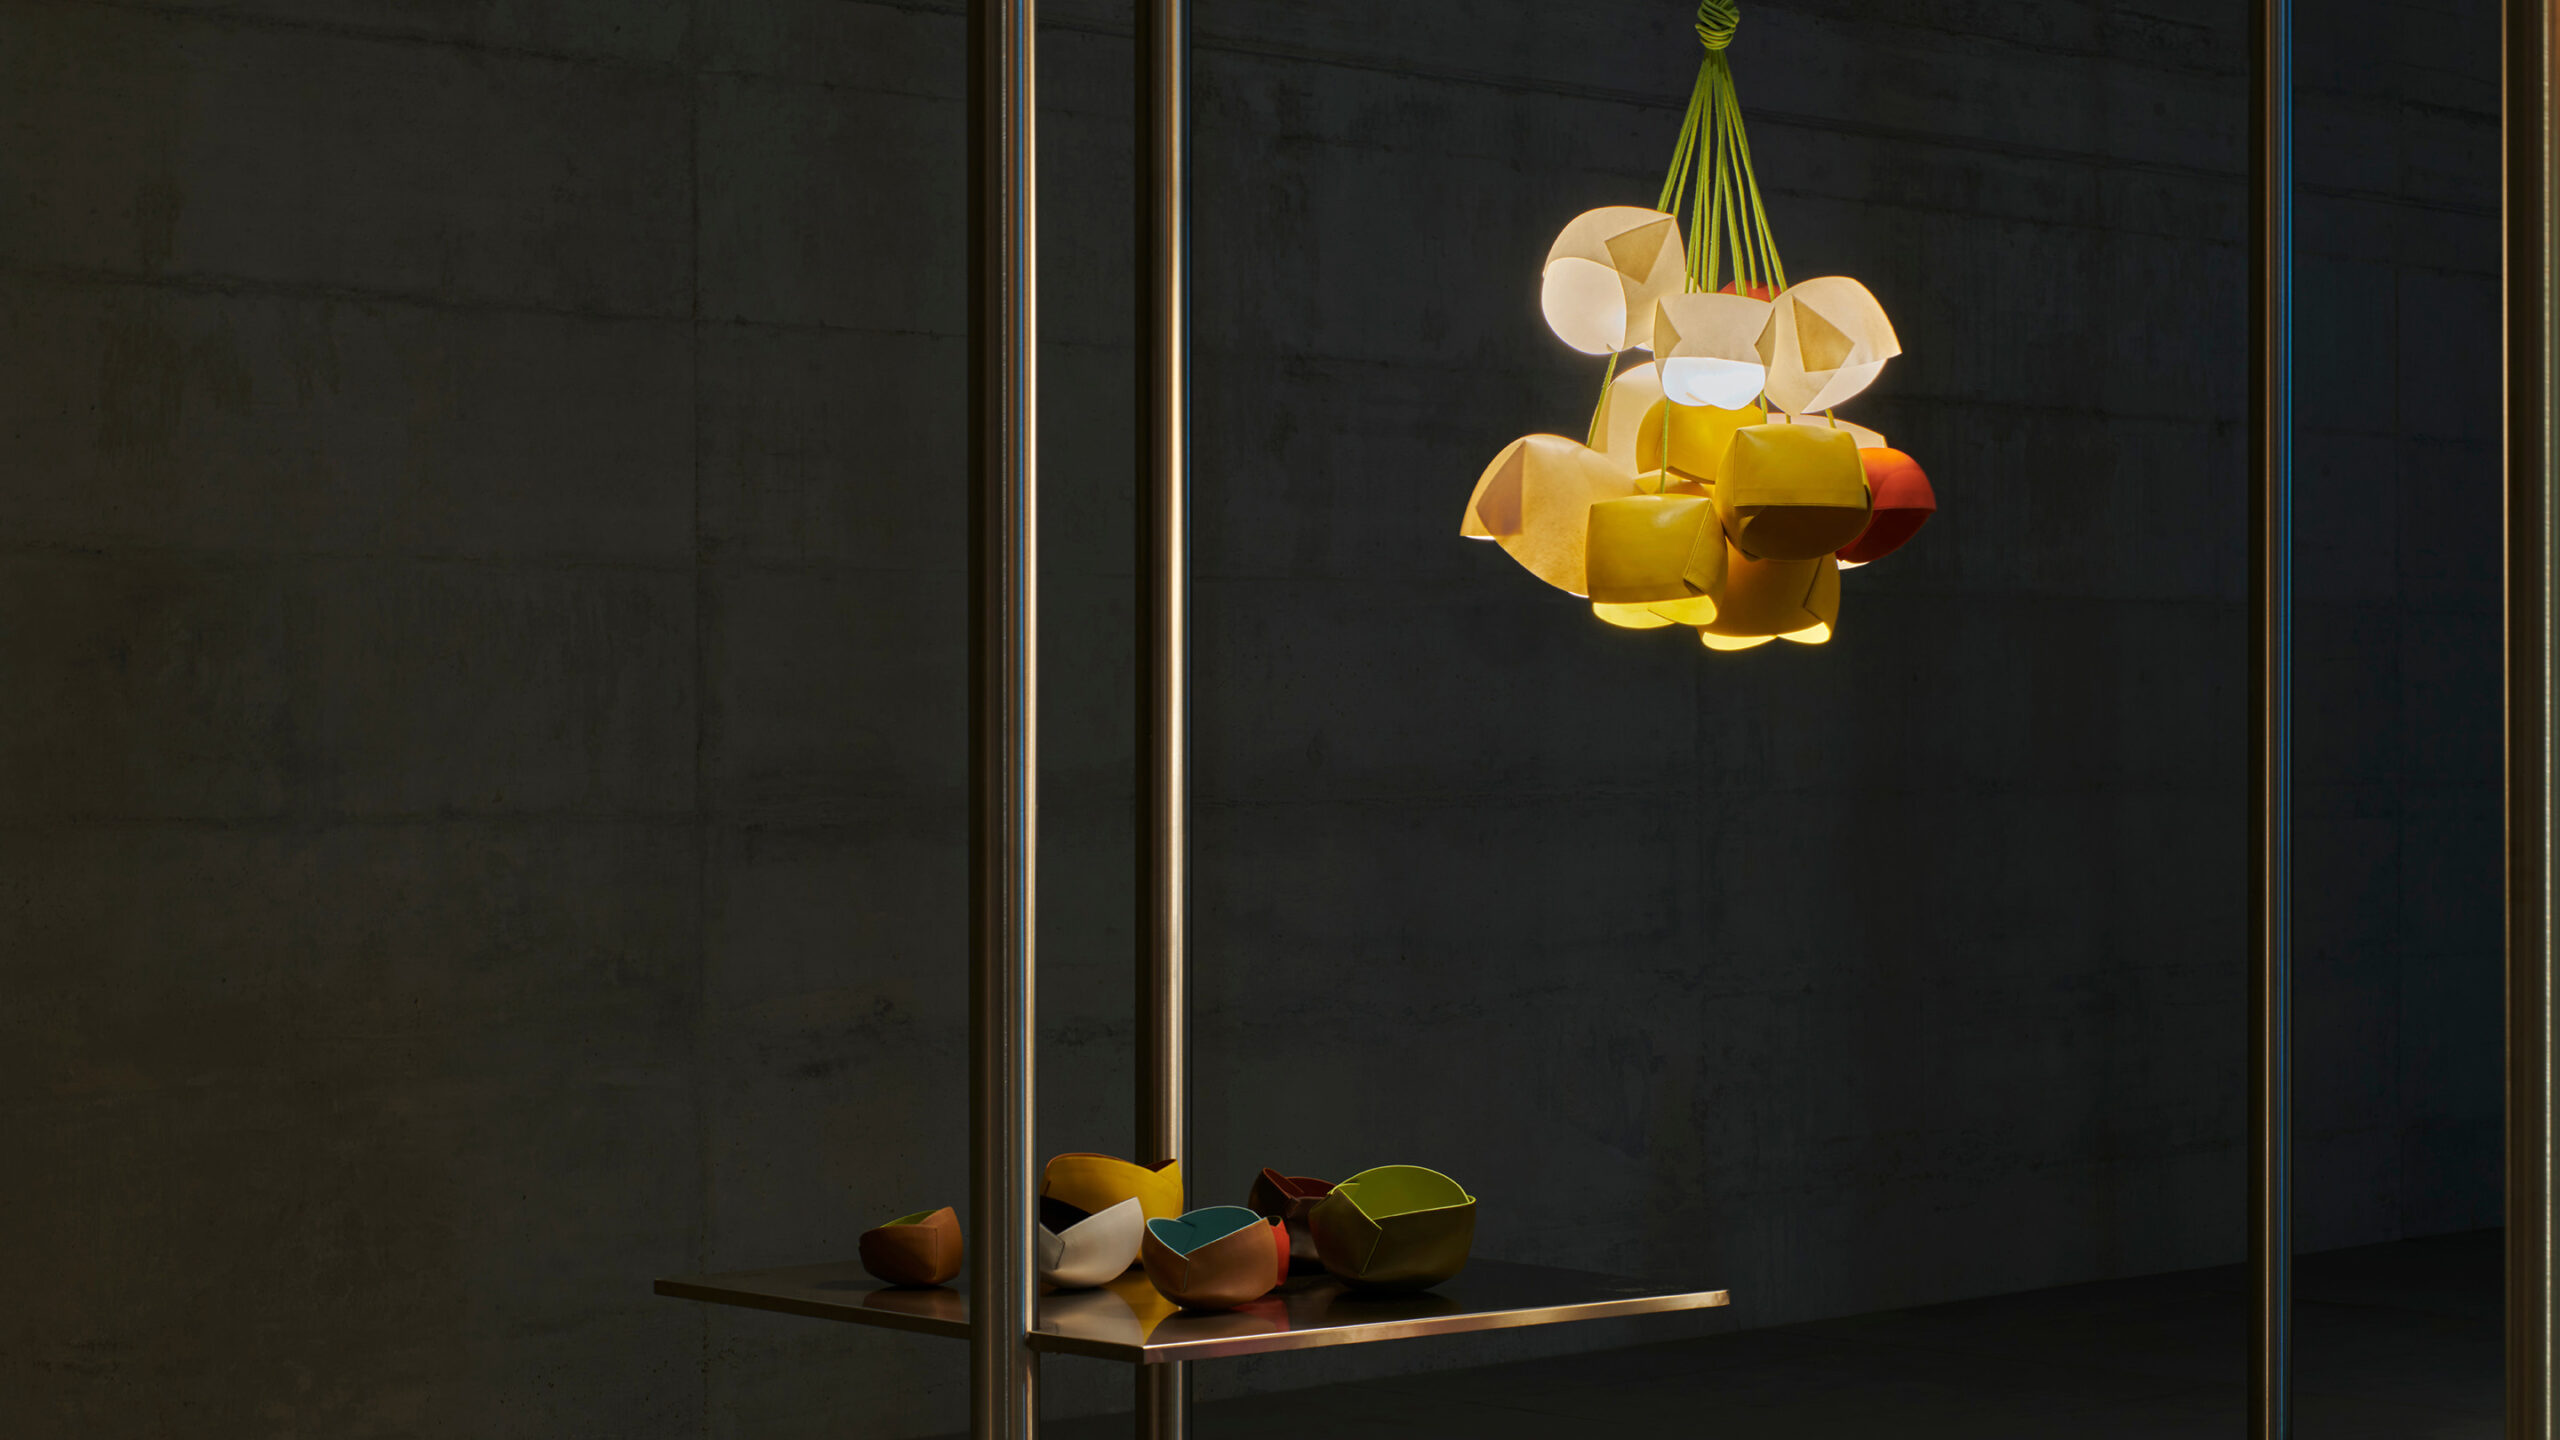 LOEWE Illuminates Salone del Mobile with Stunning Artist-Made Lamp Collection